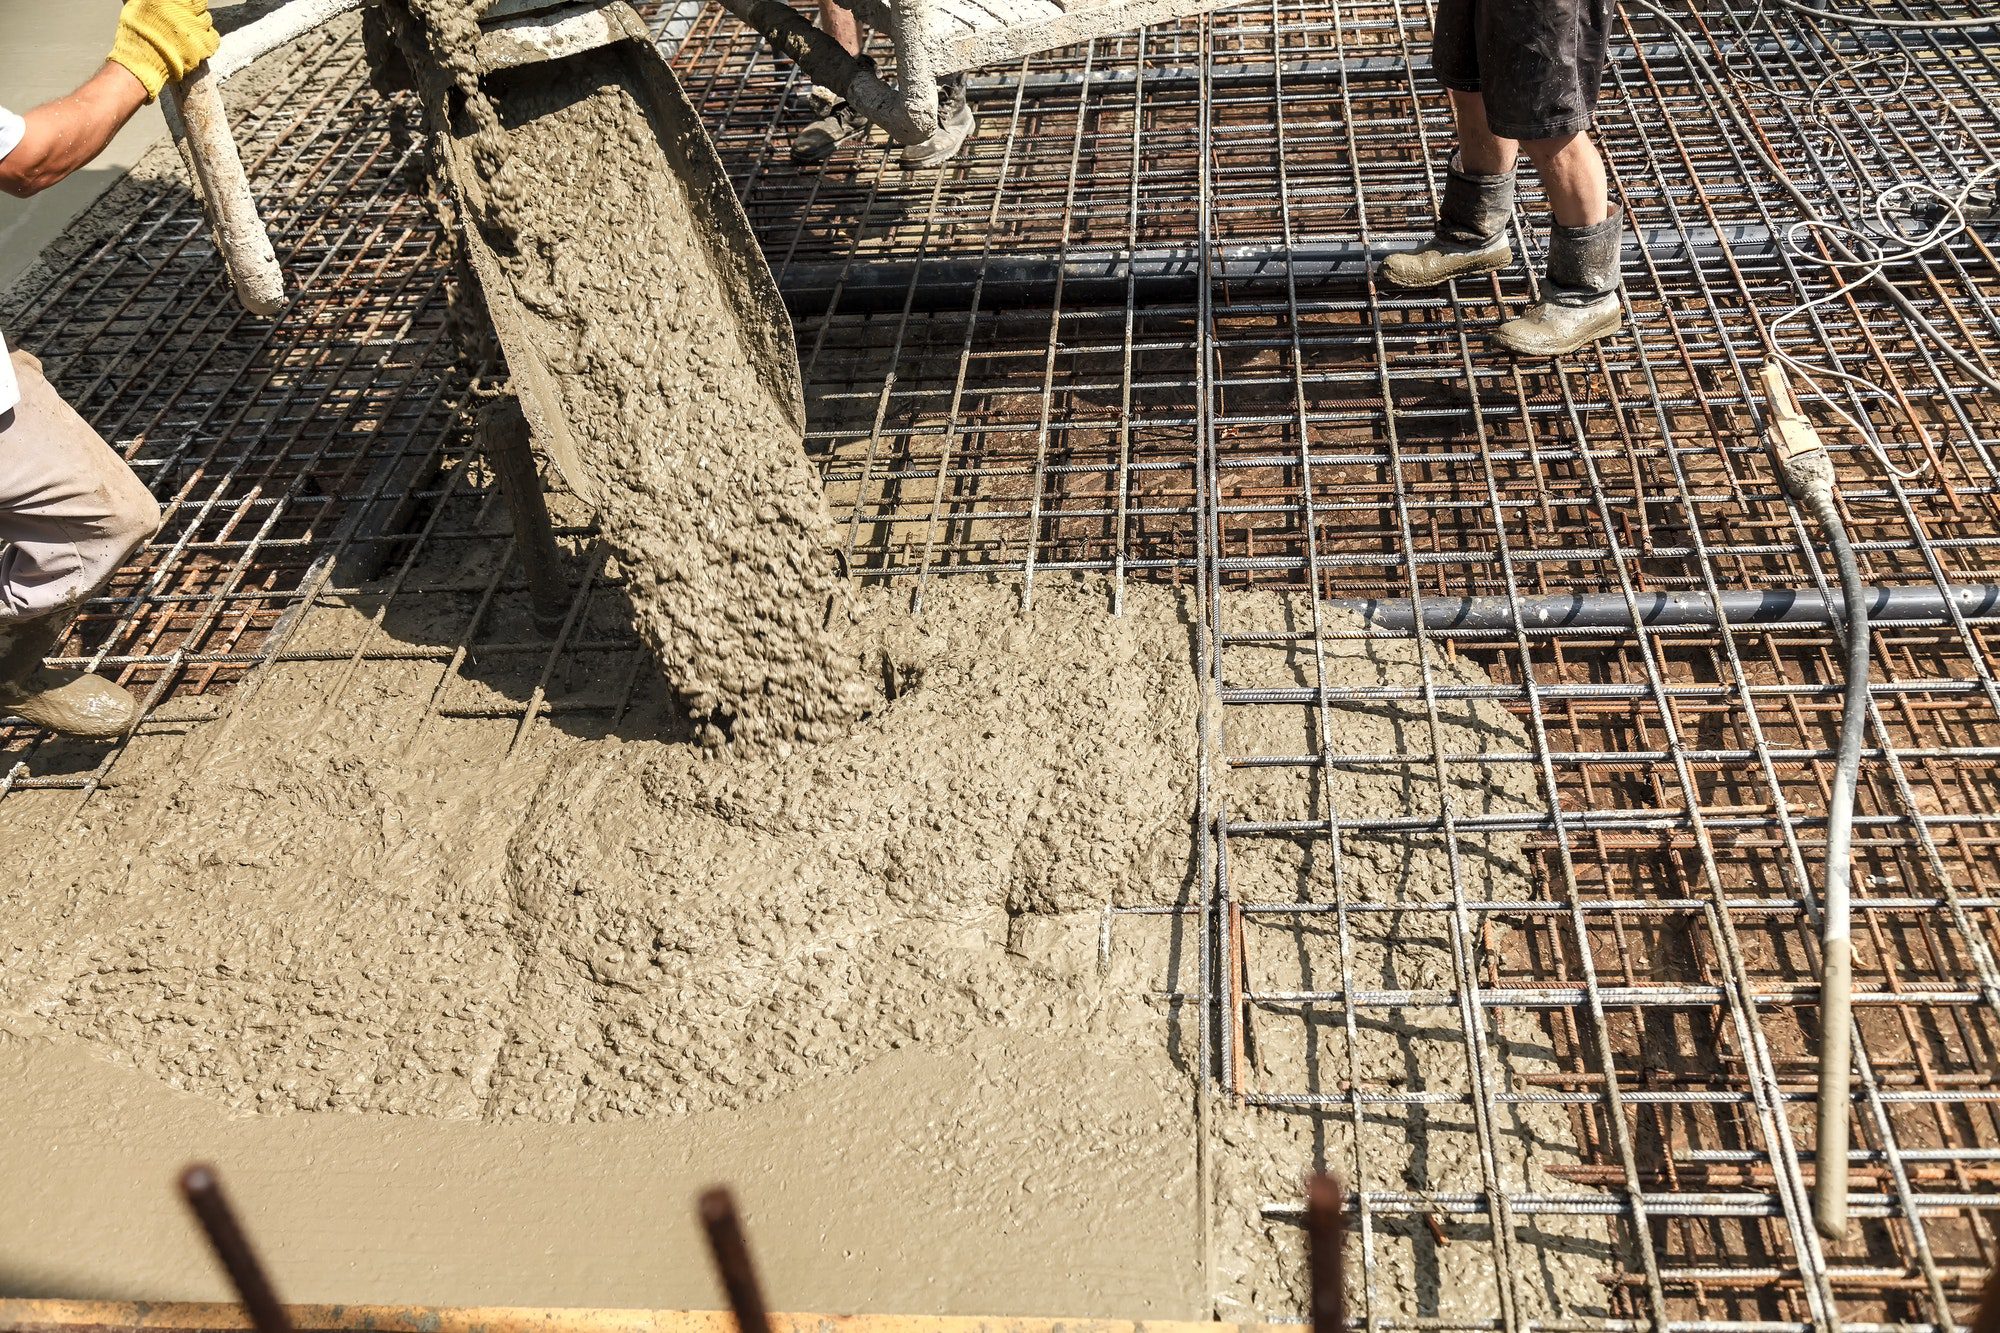 pouring concrete into the construction of the house builders are pouring ready mixed concrete